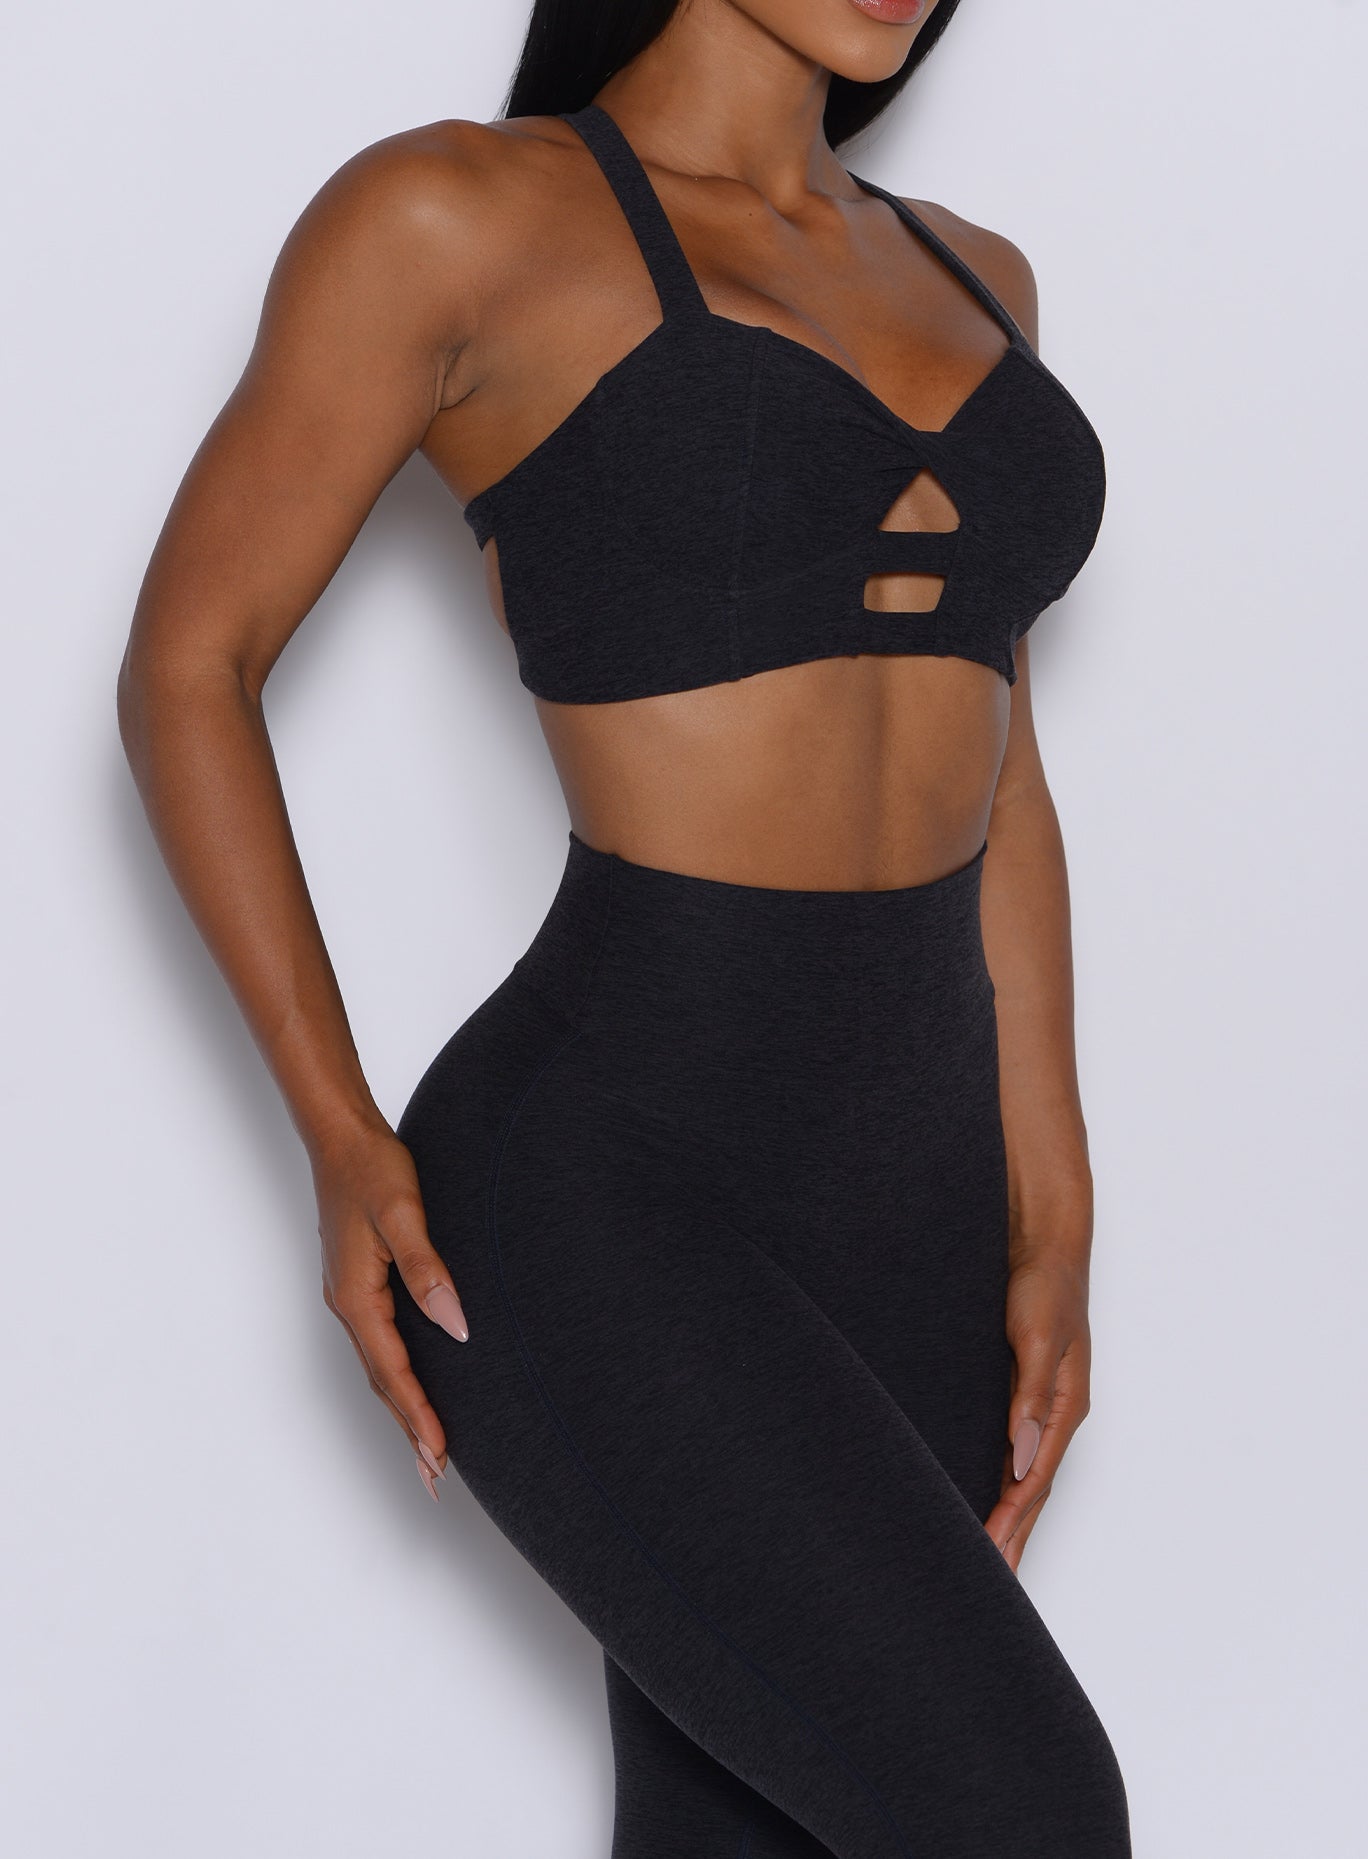 right side profile view of a model wearing our black core set bra along with the matching leggings